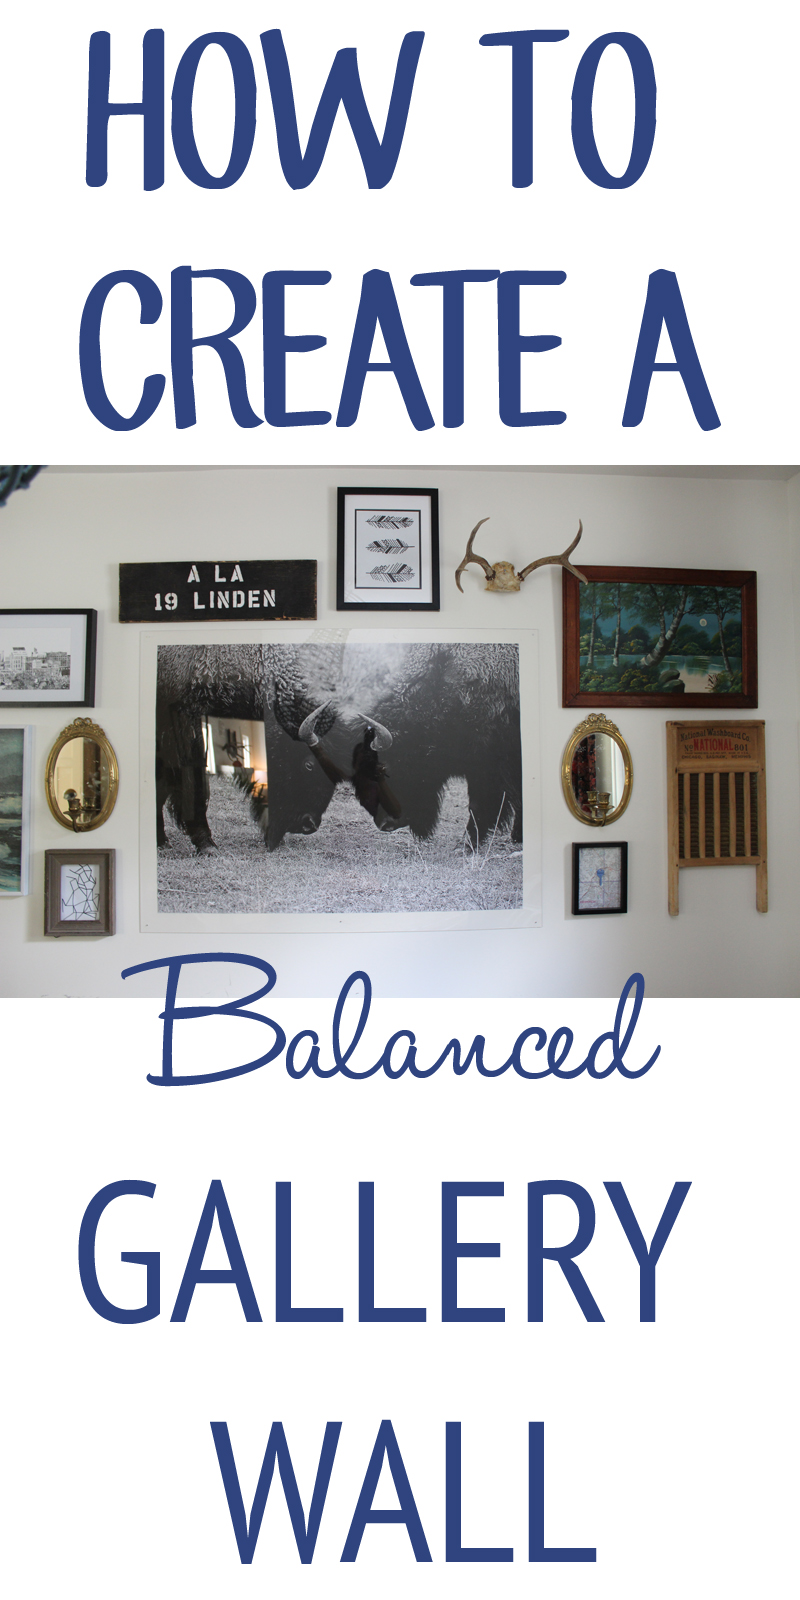 How to Create a Balanced Gallery Wall